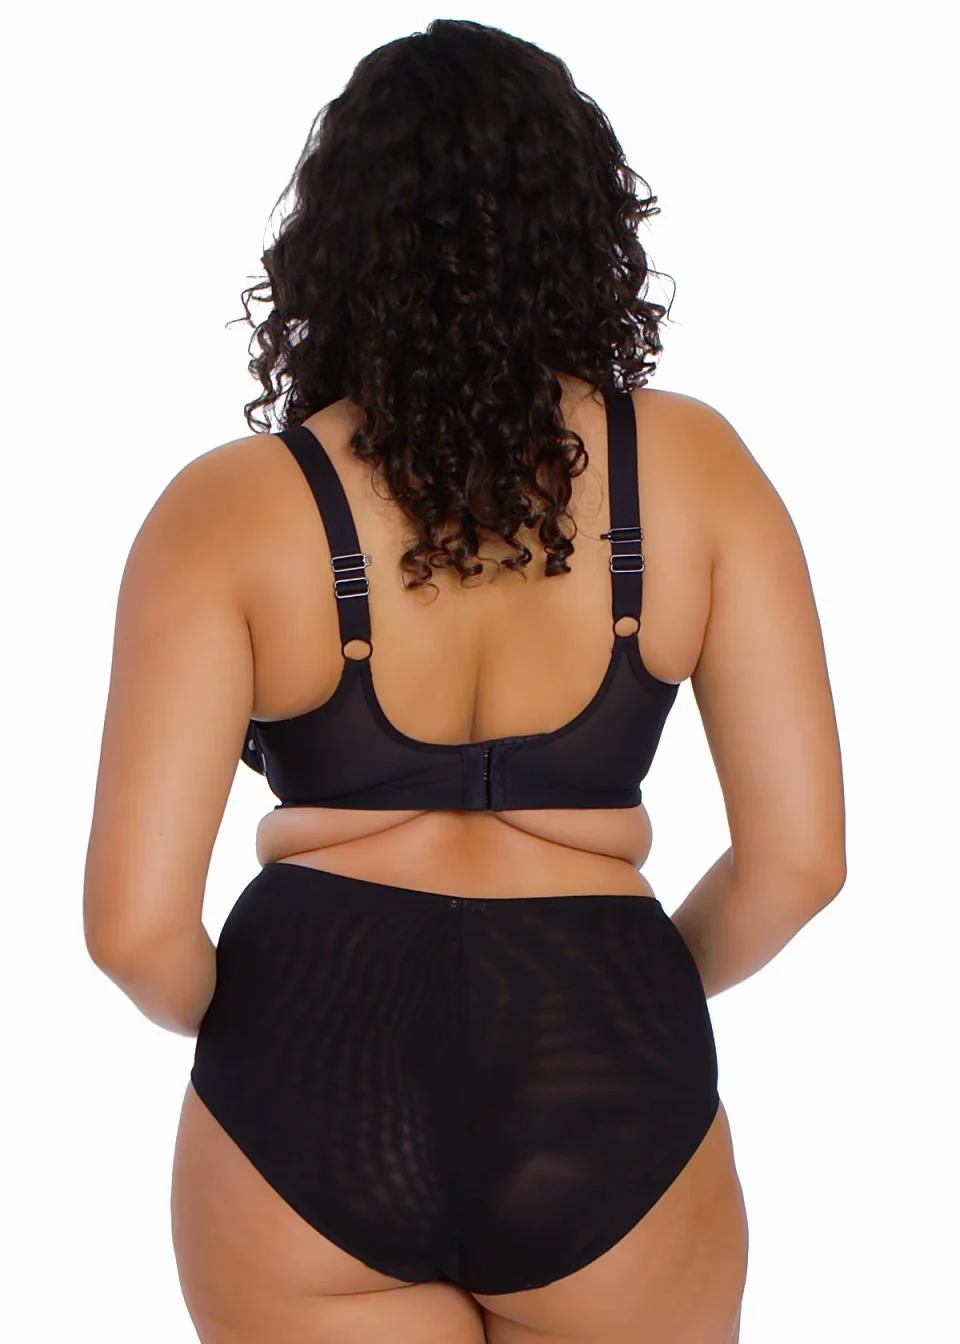 SKIMS Naked Underwire Demi Bra in Onyx 44D Size 44 D - $85 New With Tags -  From Matilda